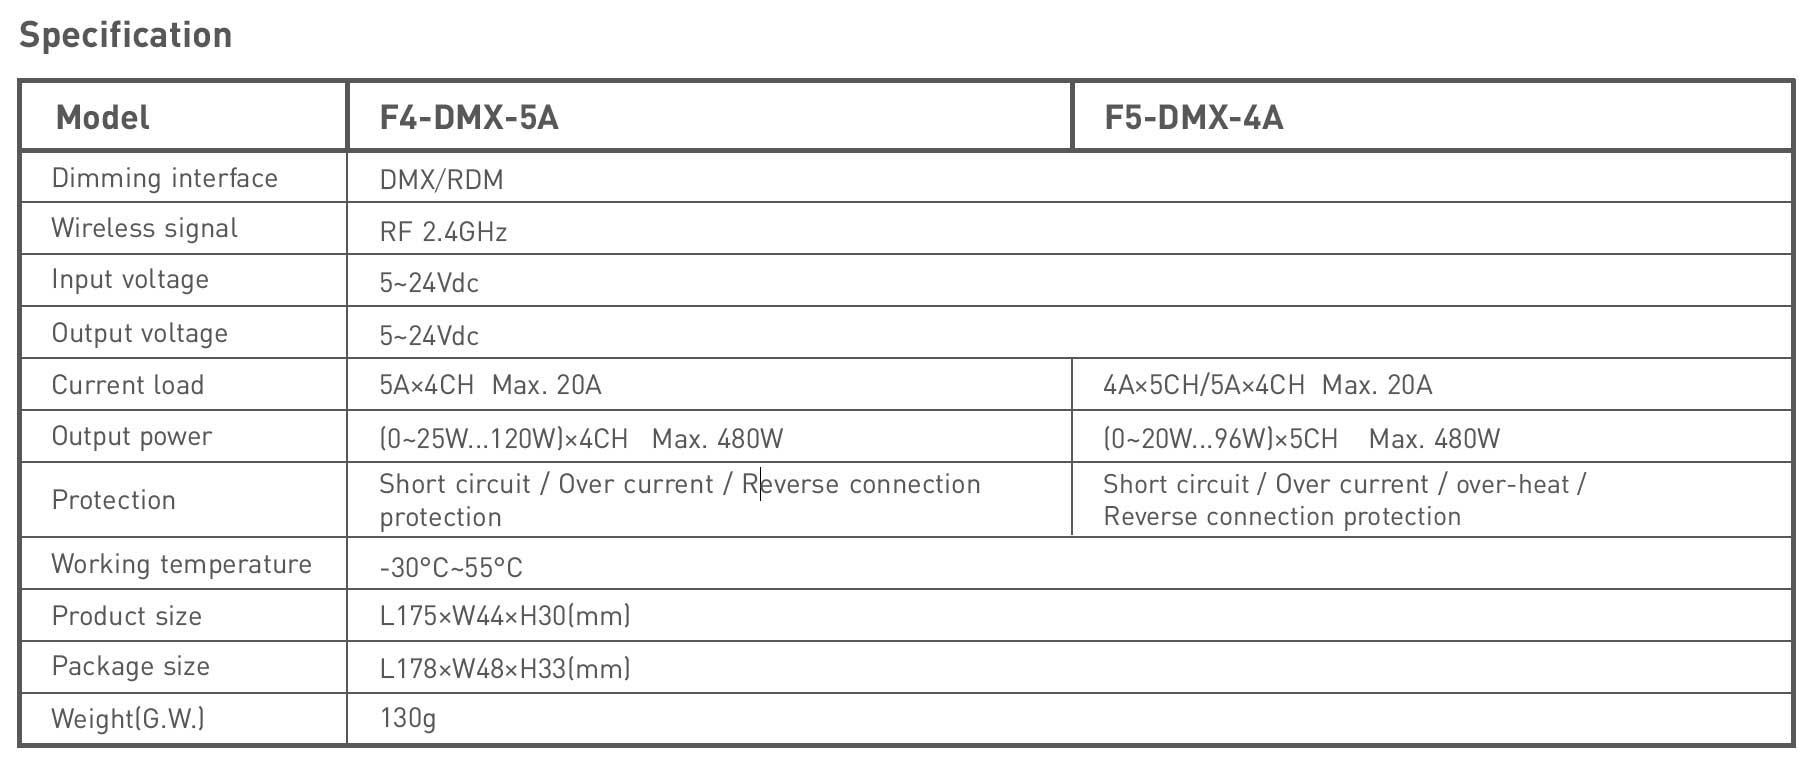 LED RF 2.4GHz Wireless And DMX Wire Driver F5-DMX-4A Specification